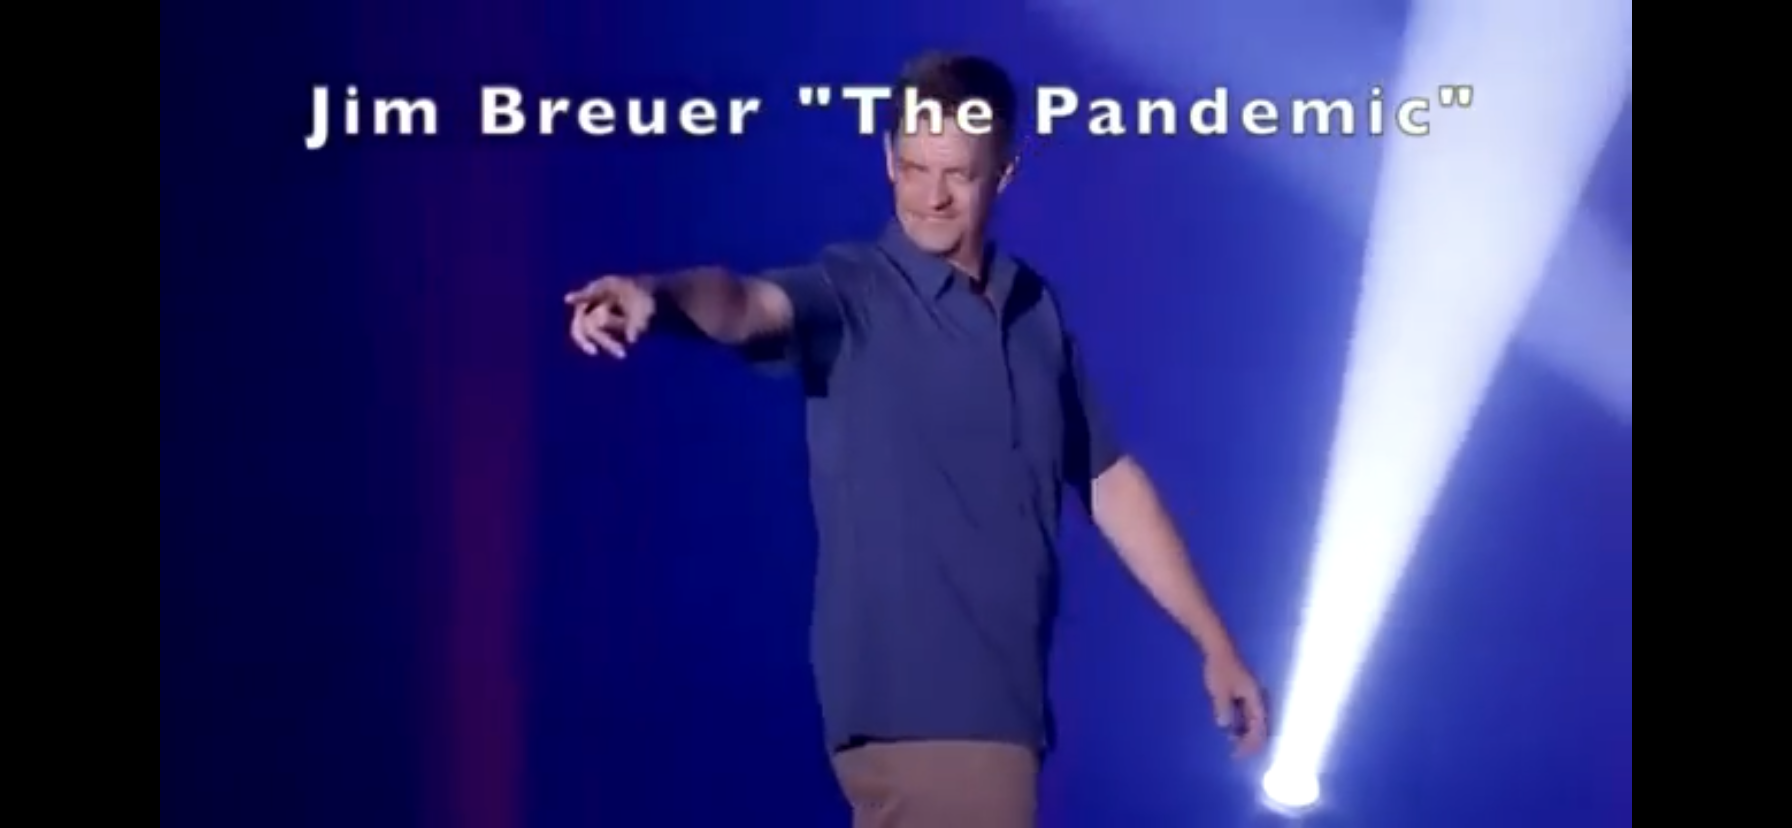 Truth In Comedy • Jim Breuer “The Pandemic”